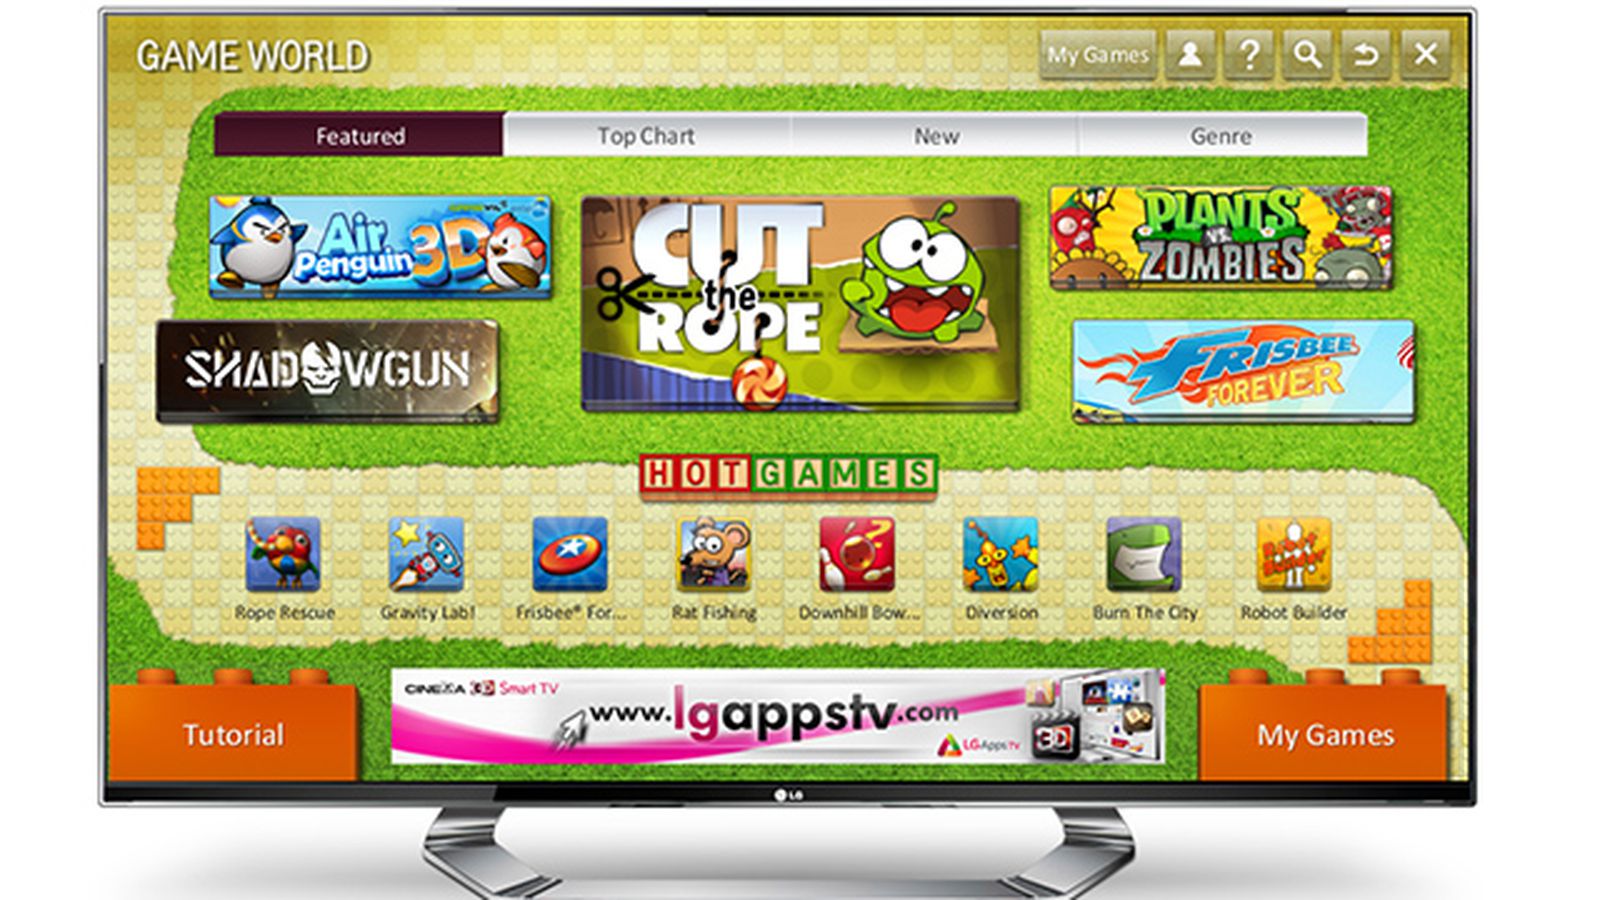 Lg Launching Smart Tv Game Portal Big Name Games On The Way The